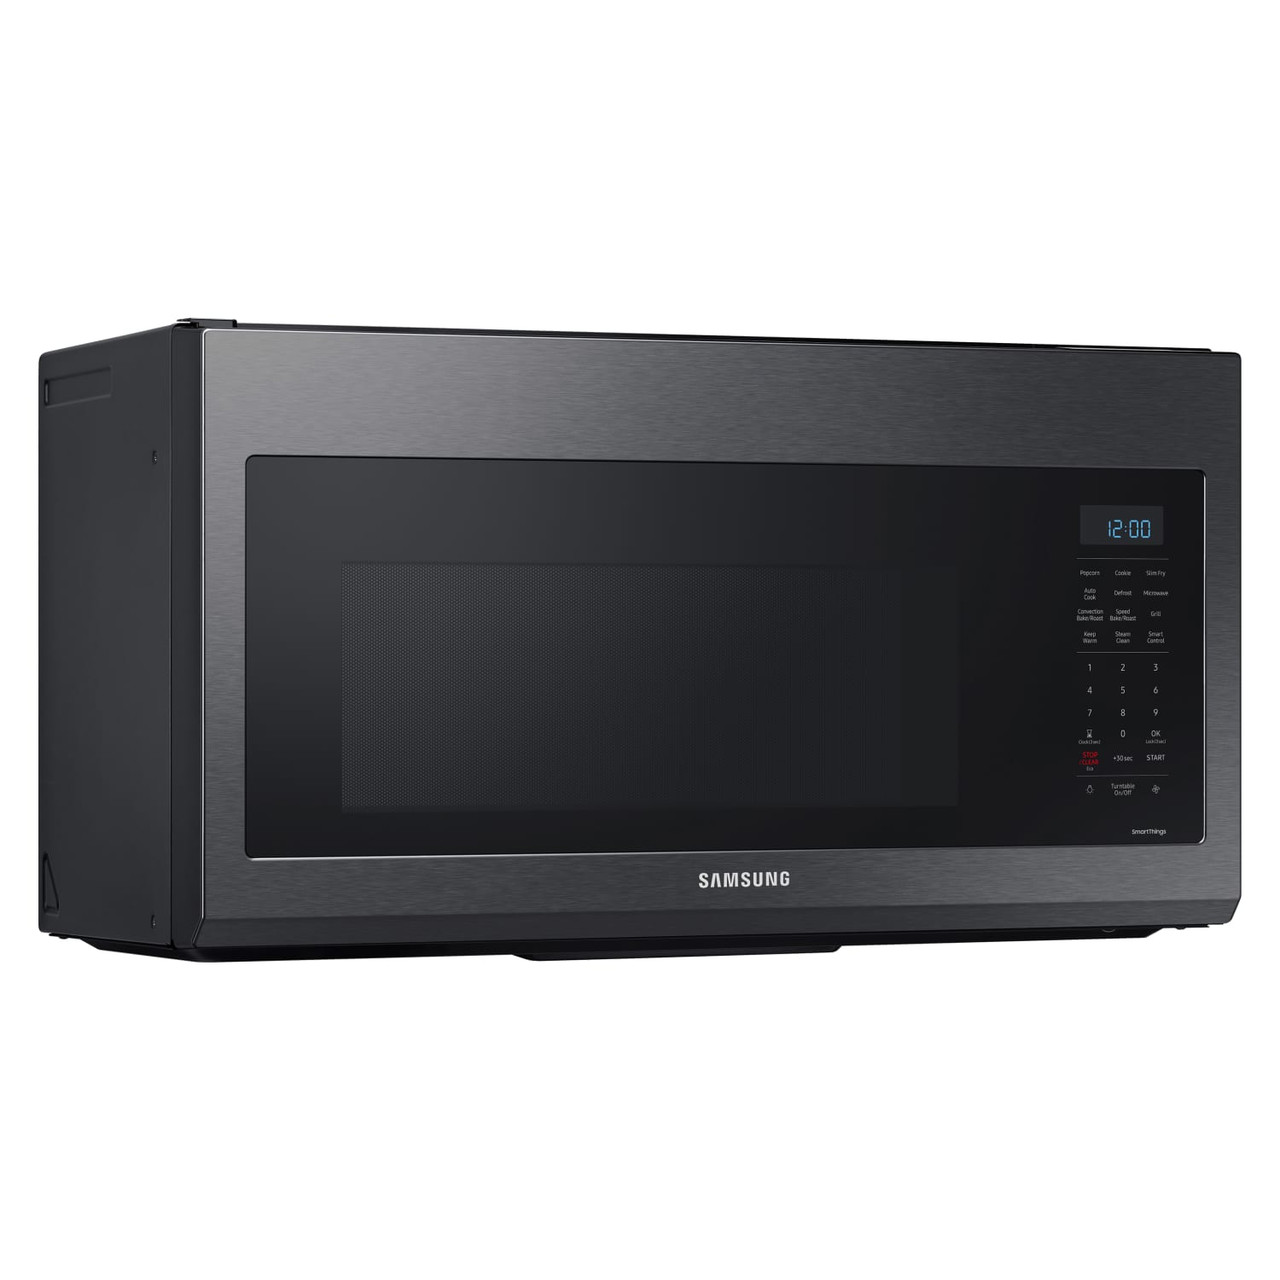 Samsung 1.7 cu. ft. Over-the-Range Convection Microwave, WiFi Enabled, 3-Speed, 300 cu. ft.M - Black Stainless Steel